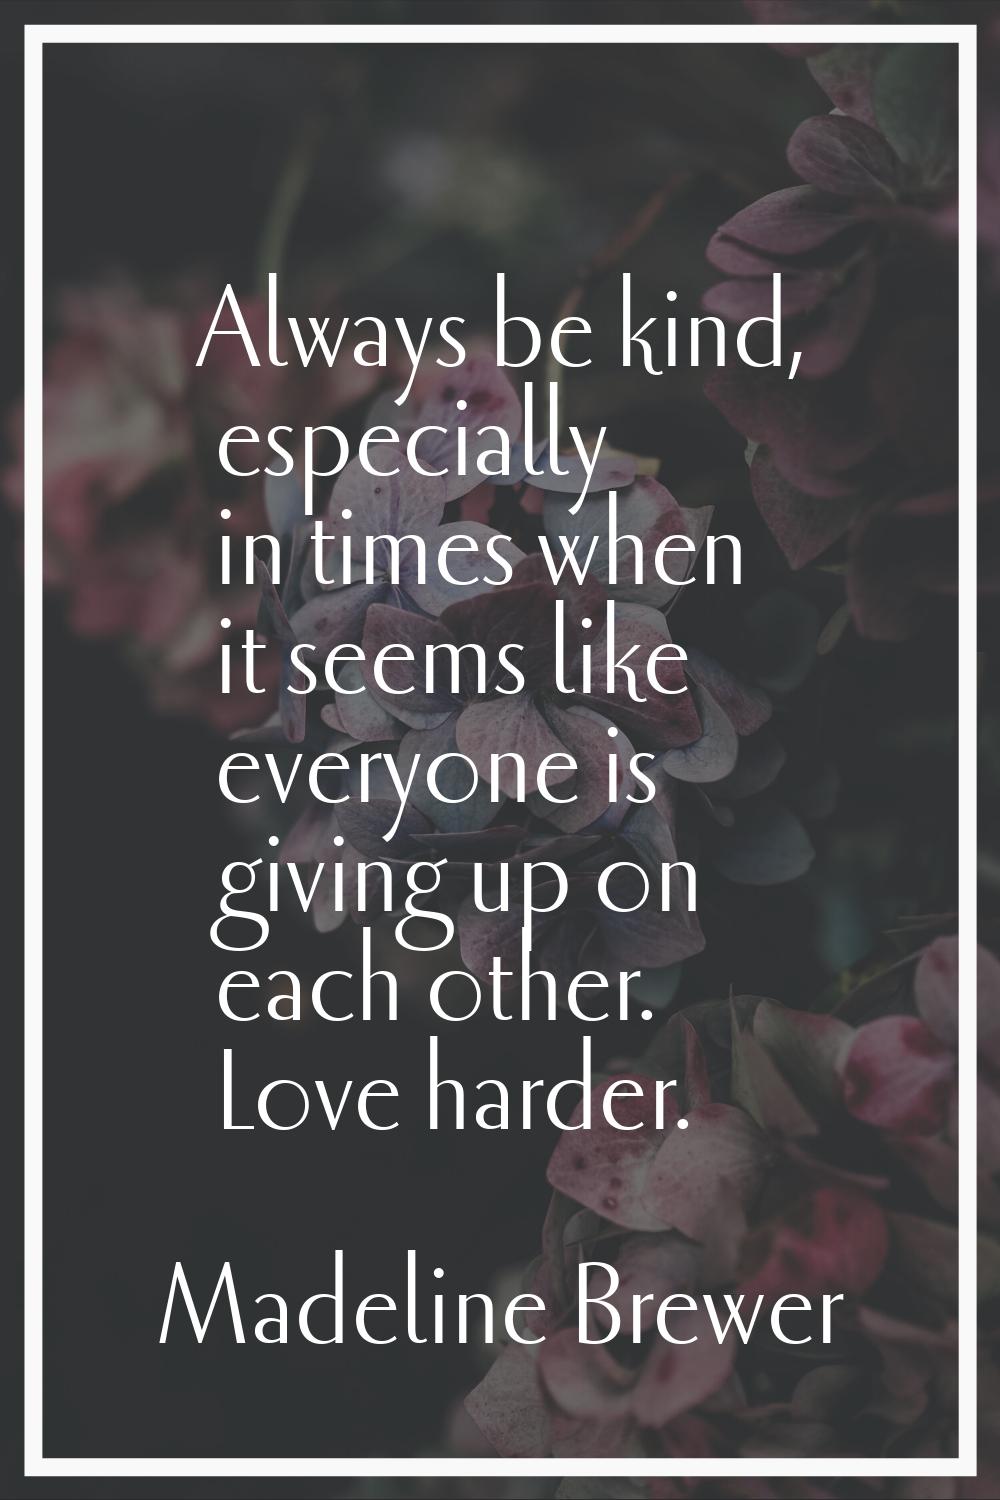 Always be kind, especially in times when it seems like everyone is giving up on each other. Love ha